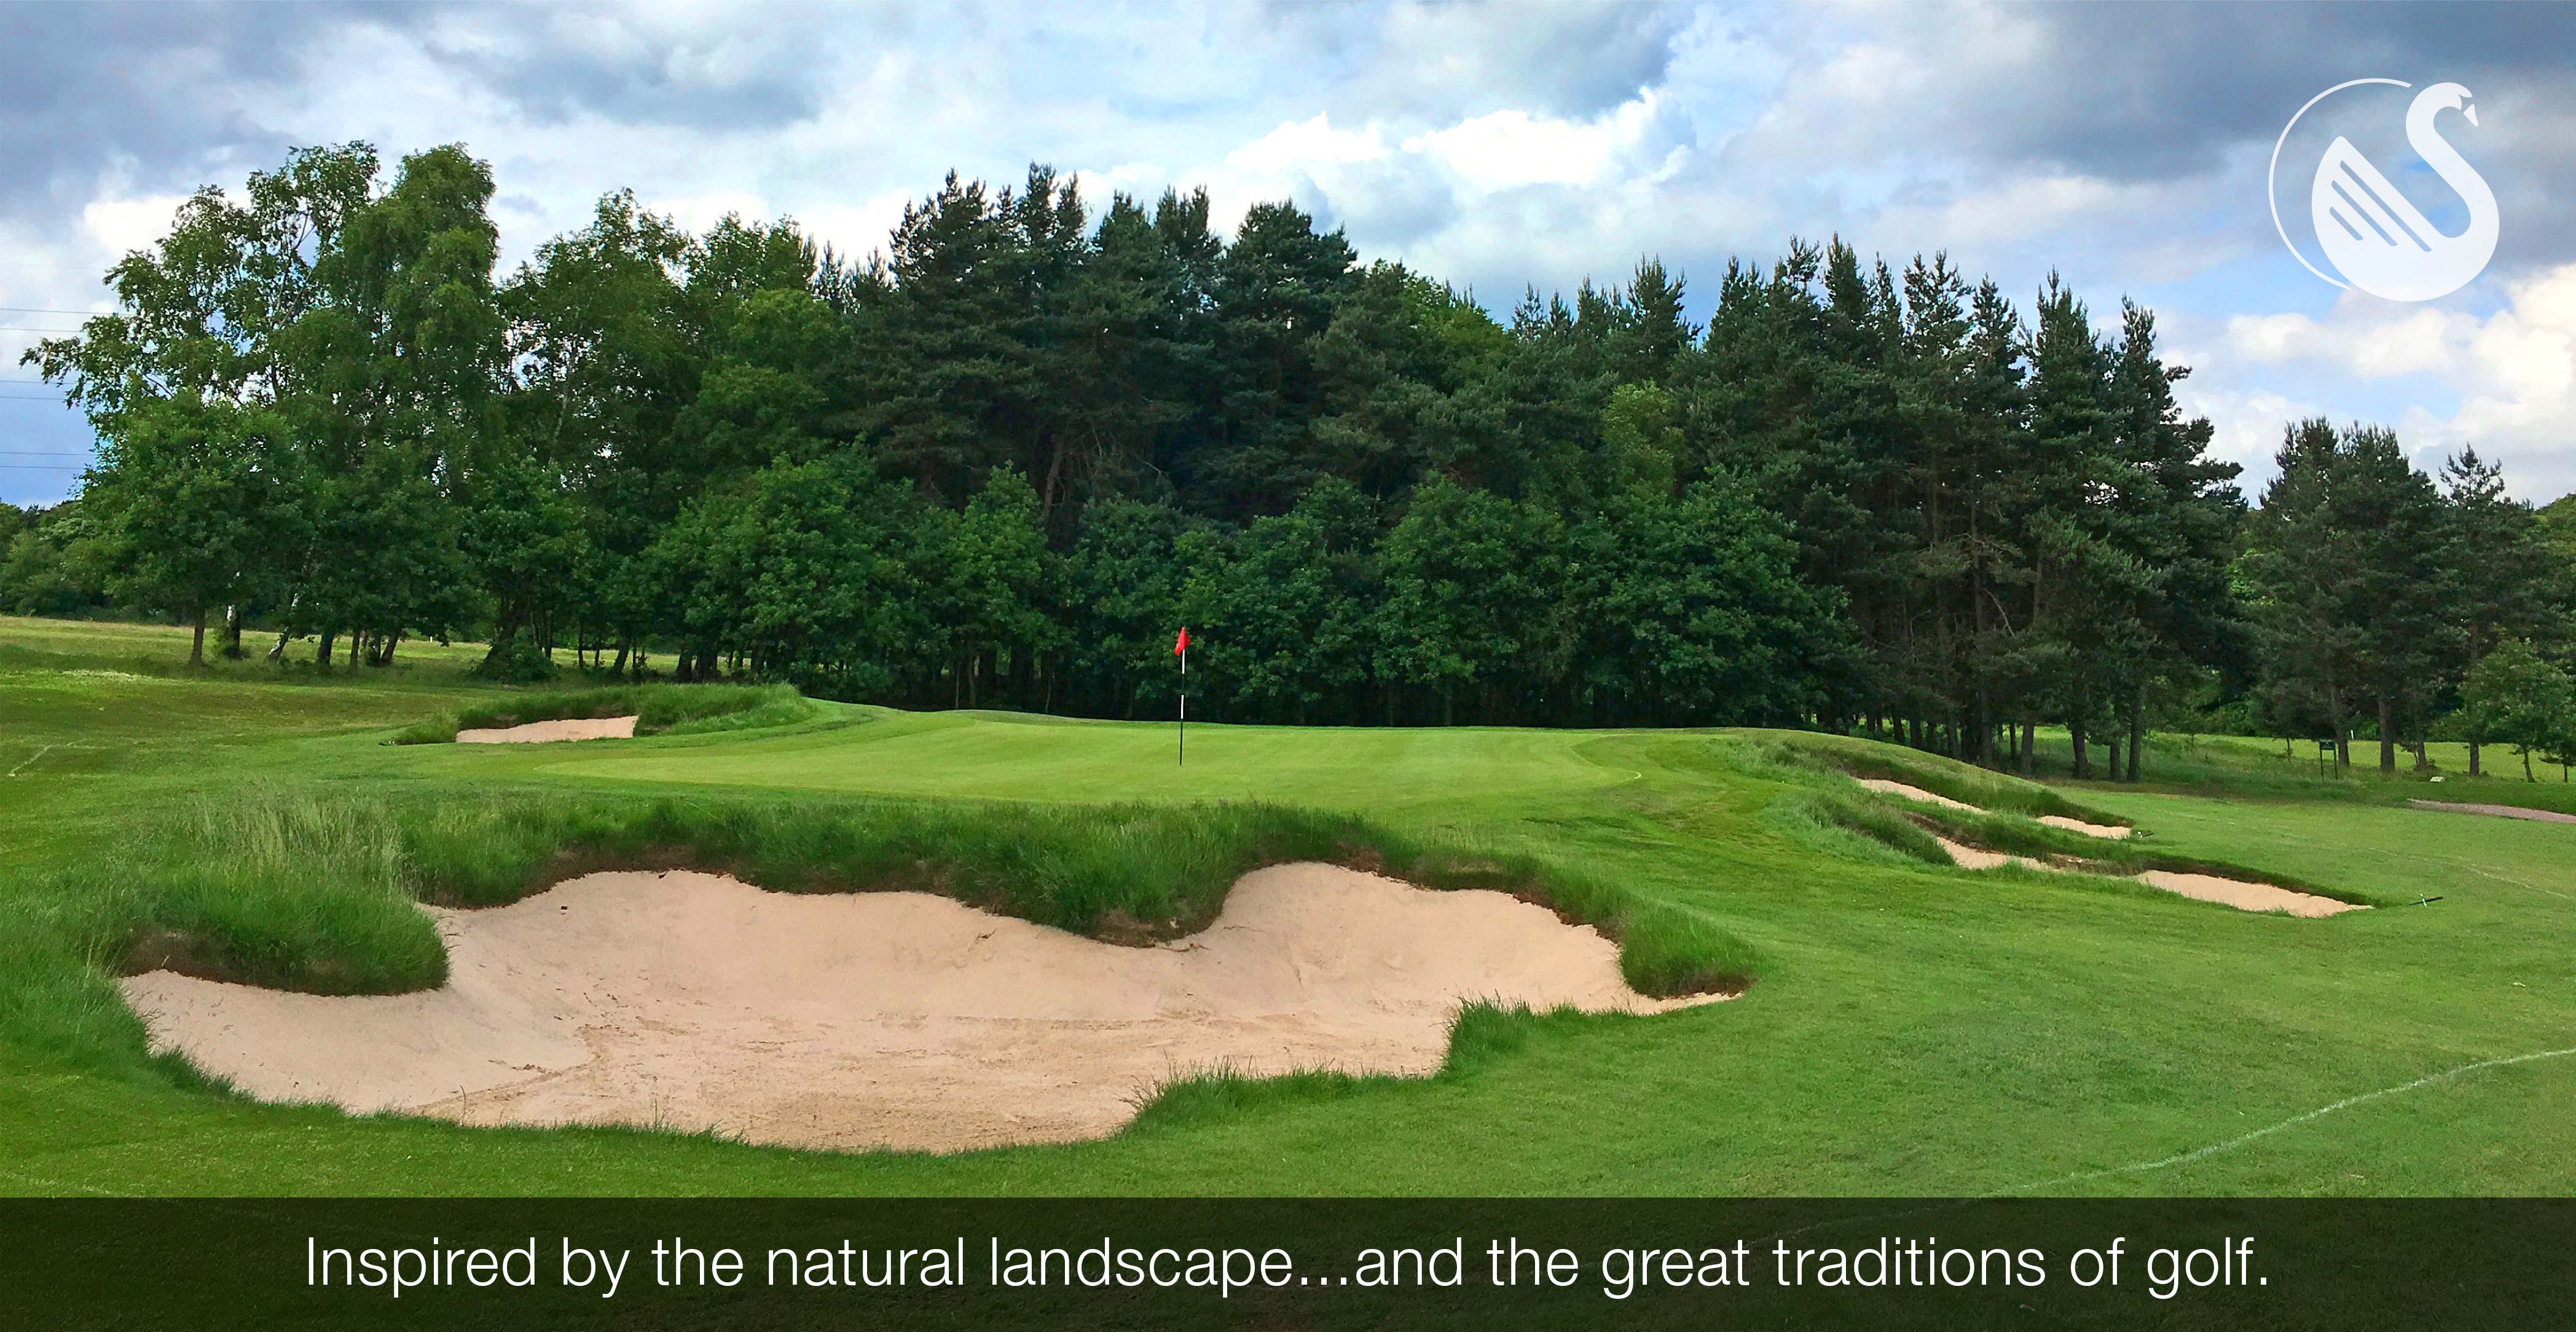 Inspired by the natural landscape...and the great traditions of golf.